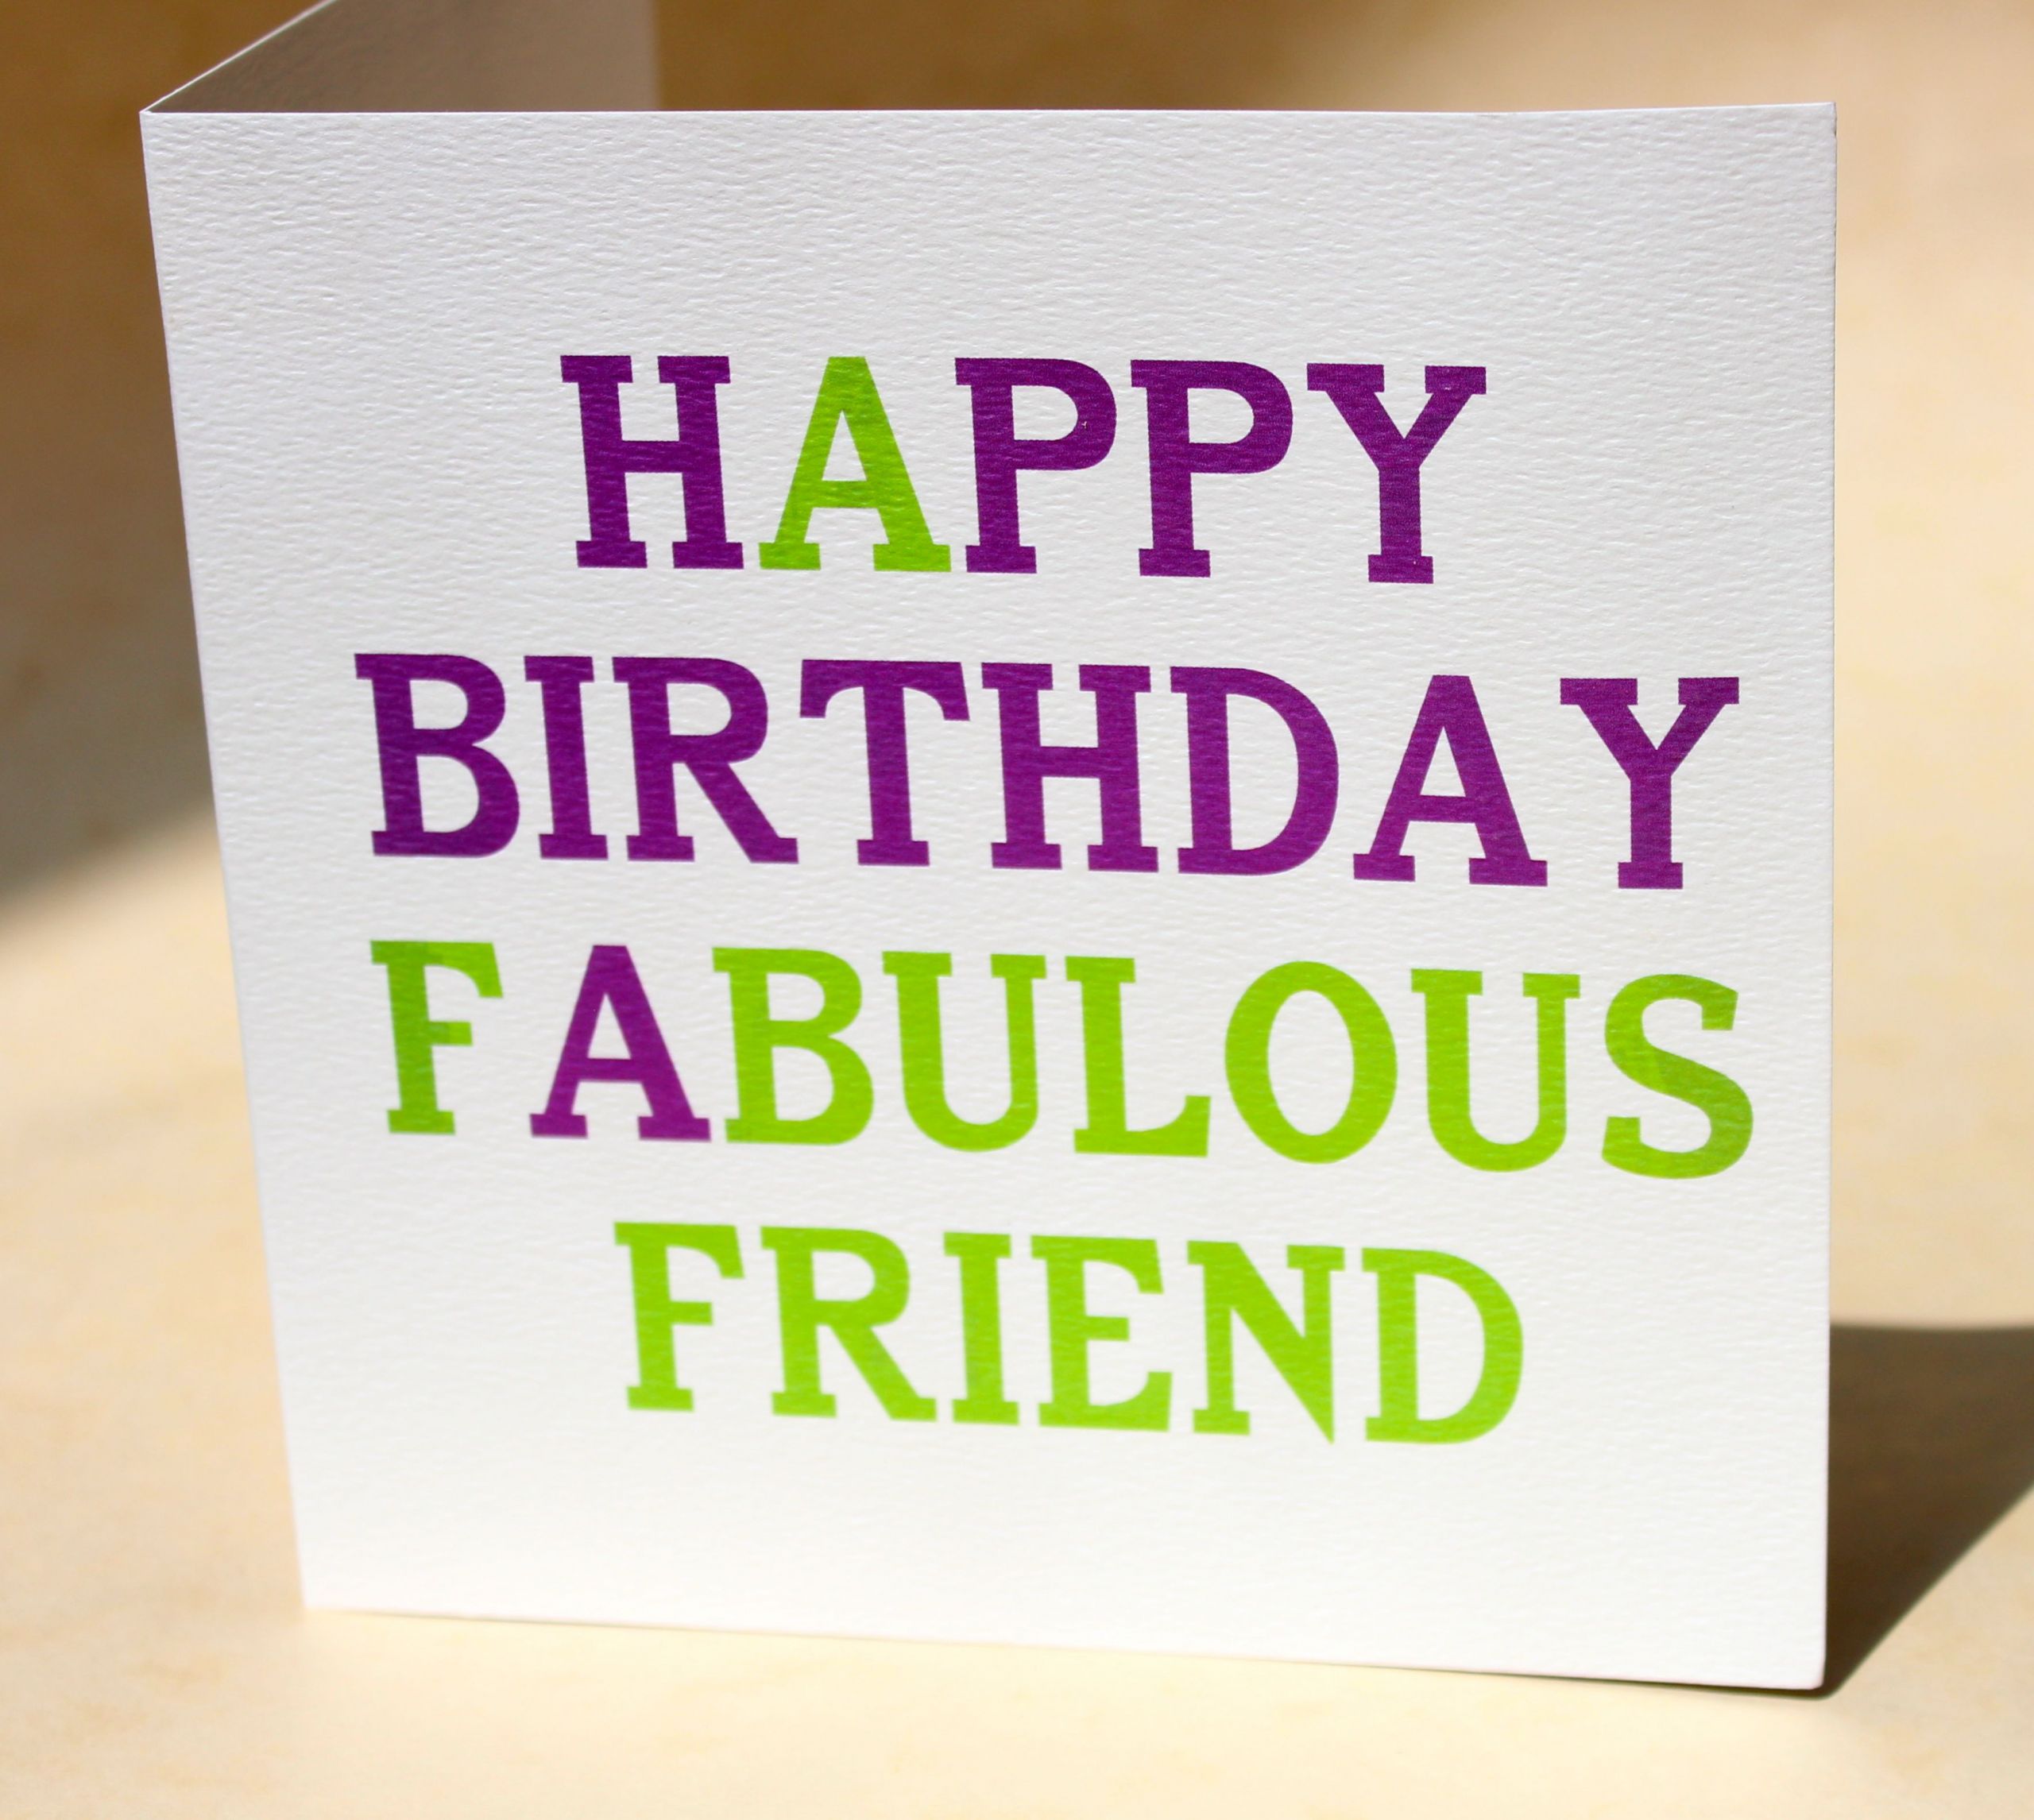 Friend Quotes For Birthday
 Happy birthday friends quotes pictures